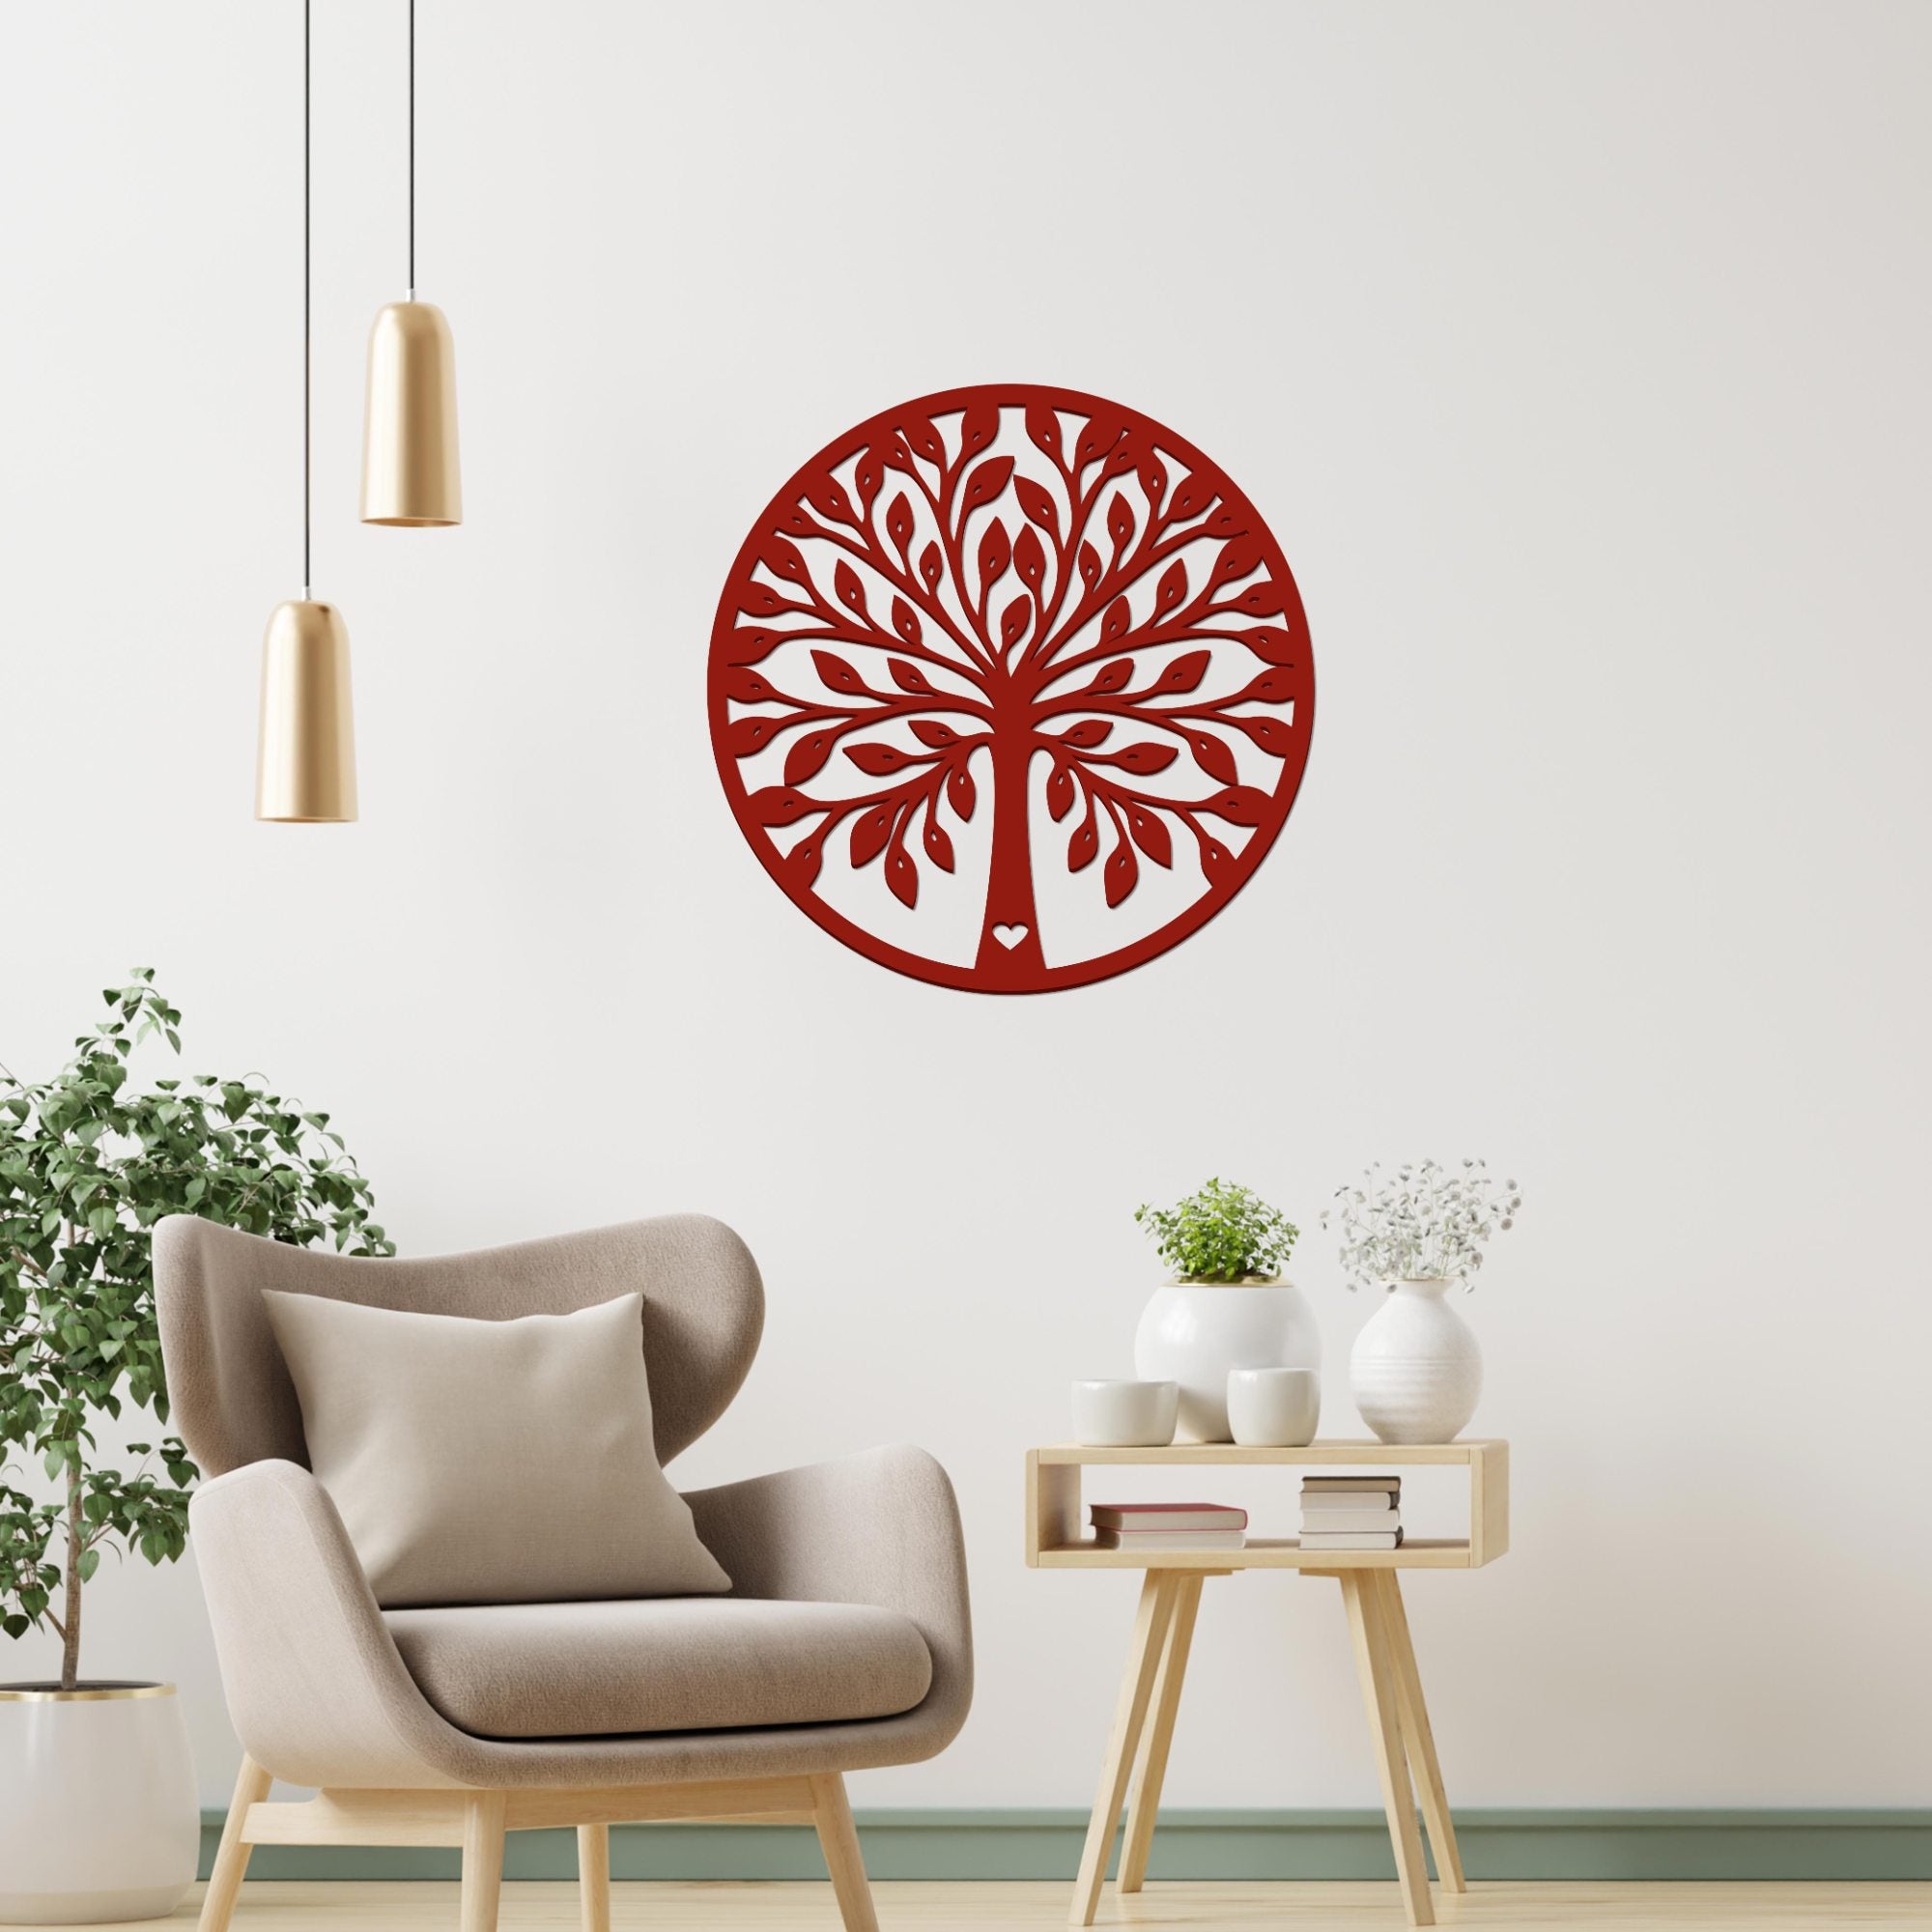 Design in Circle Premium Quality Wooden Wall Hanging